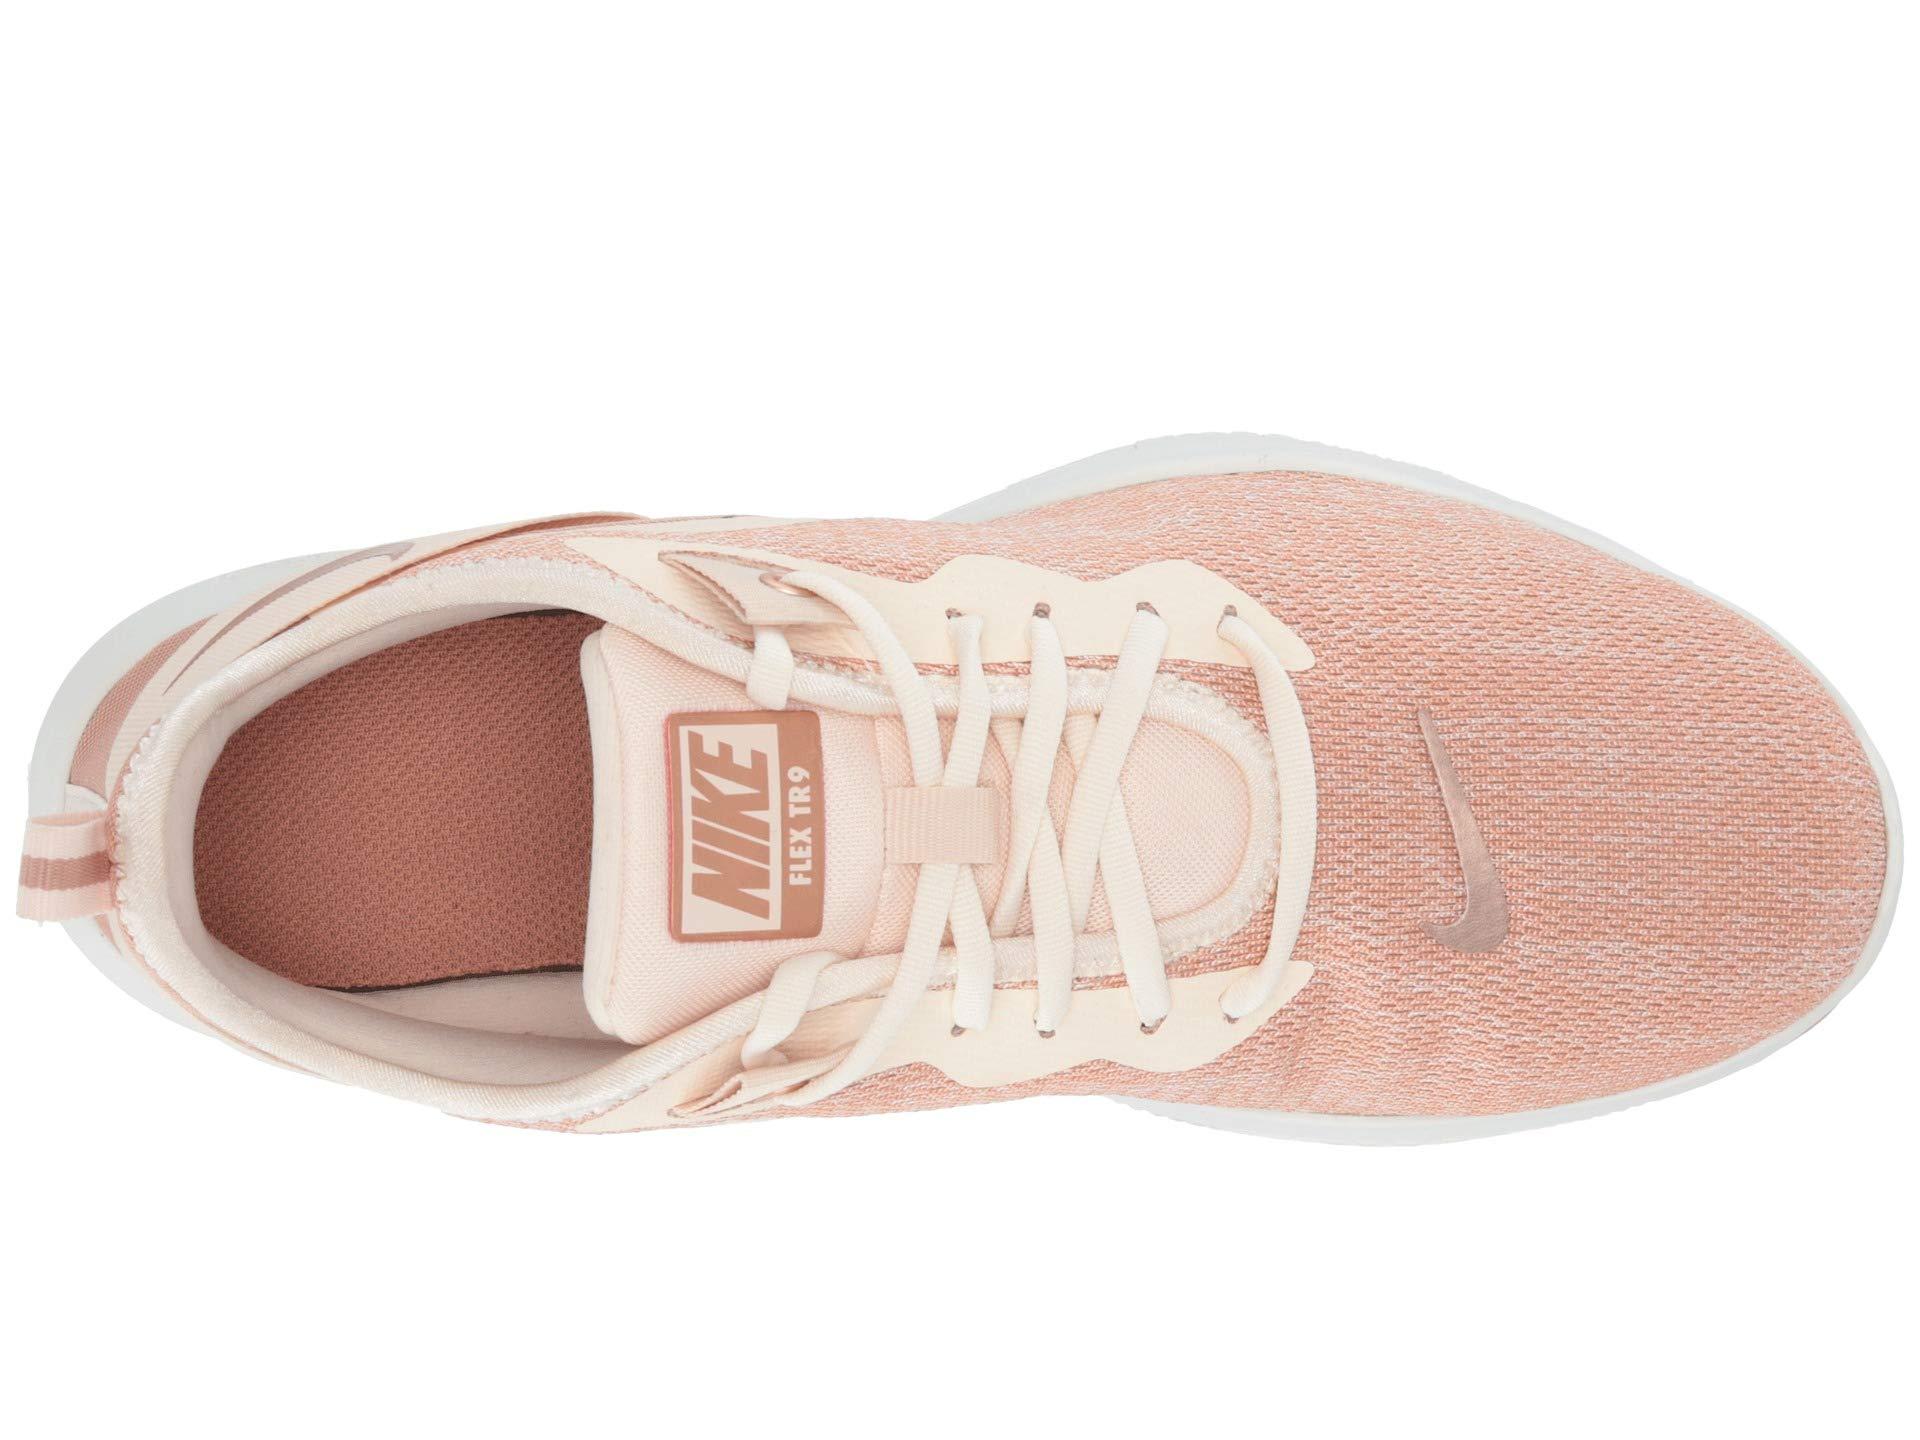 Nike Synthetic Flex Tr 9 Premium in Pink - Lyst